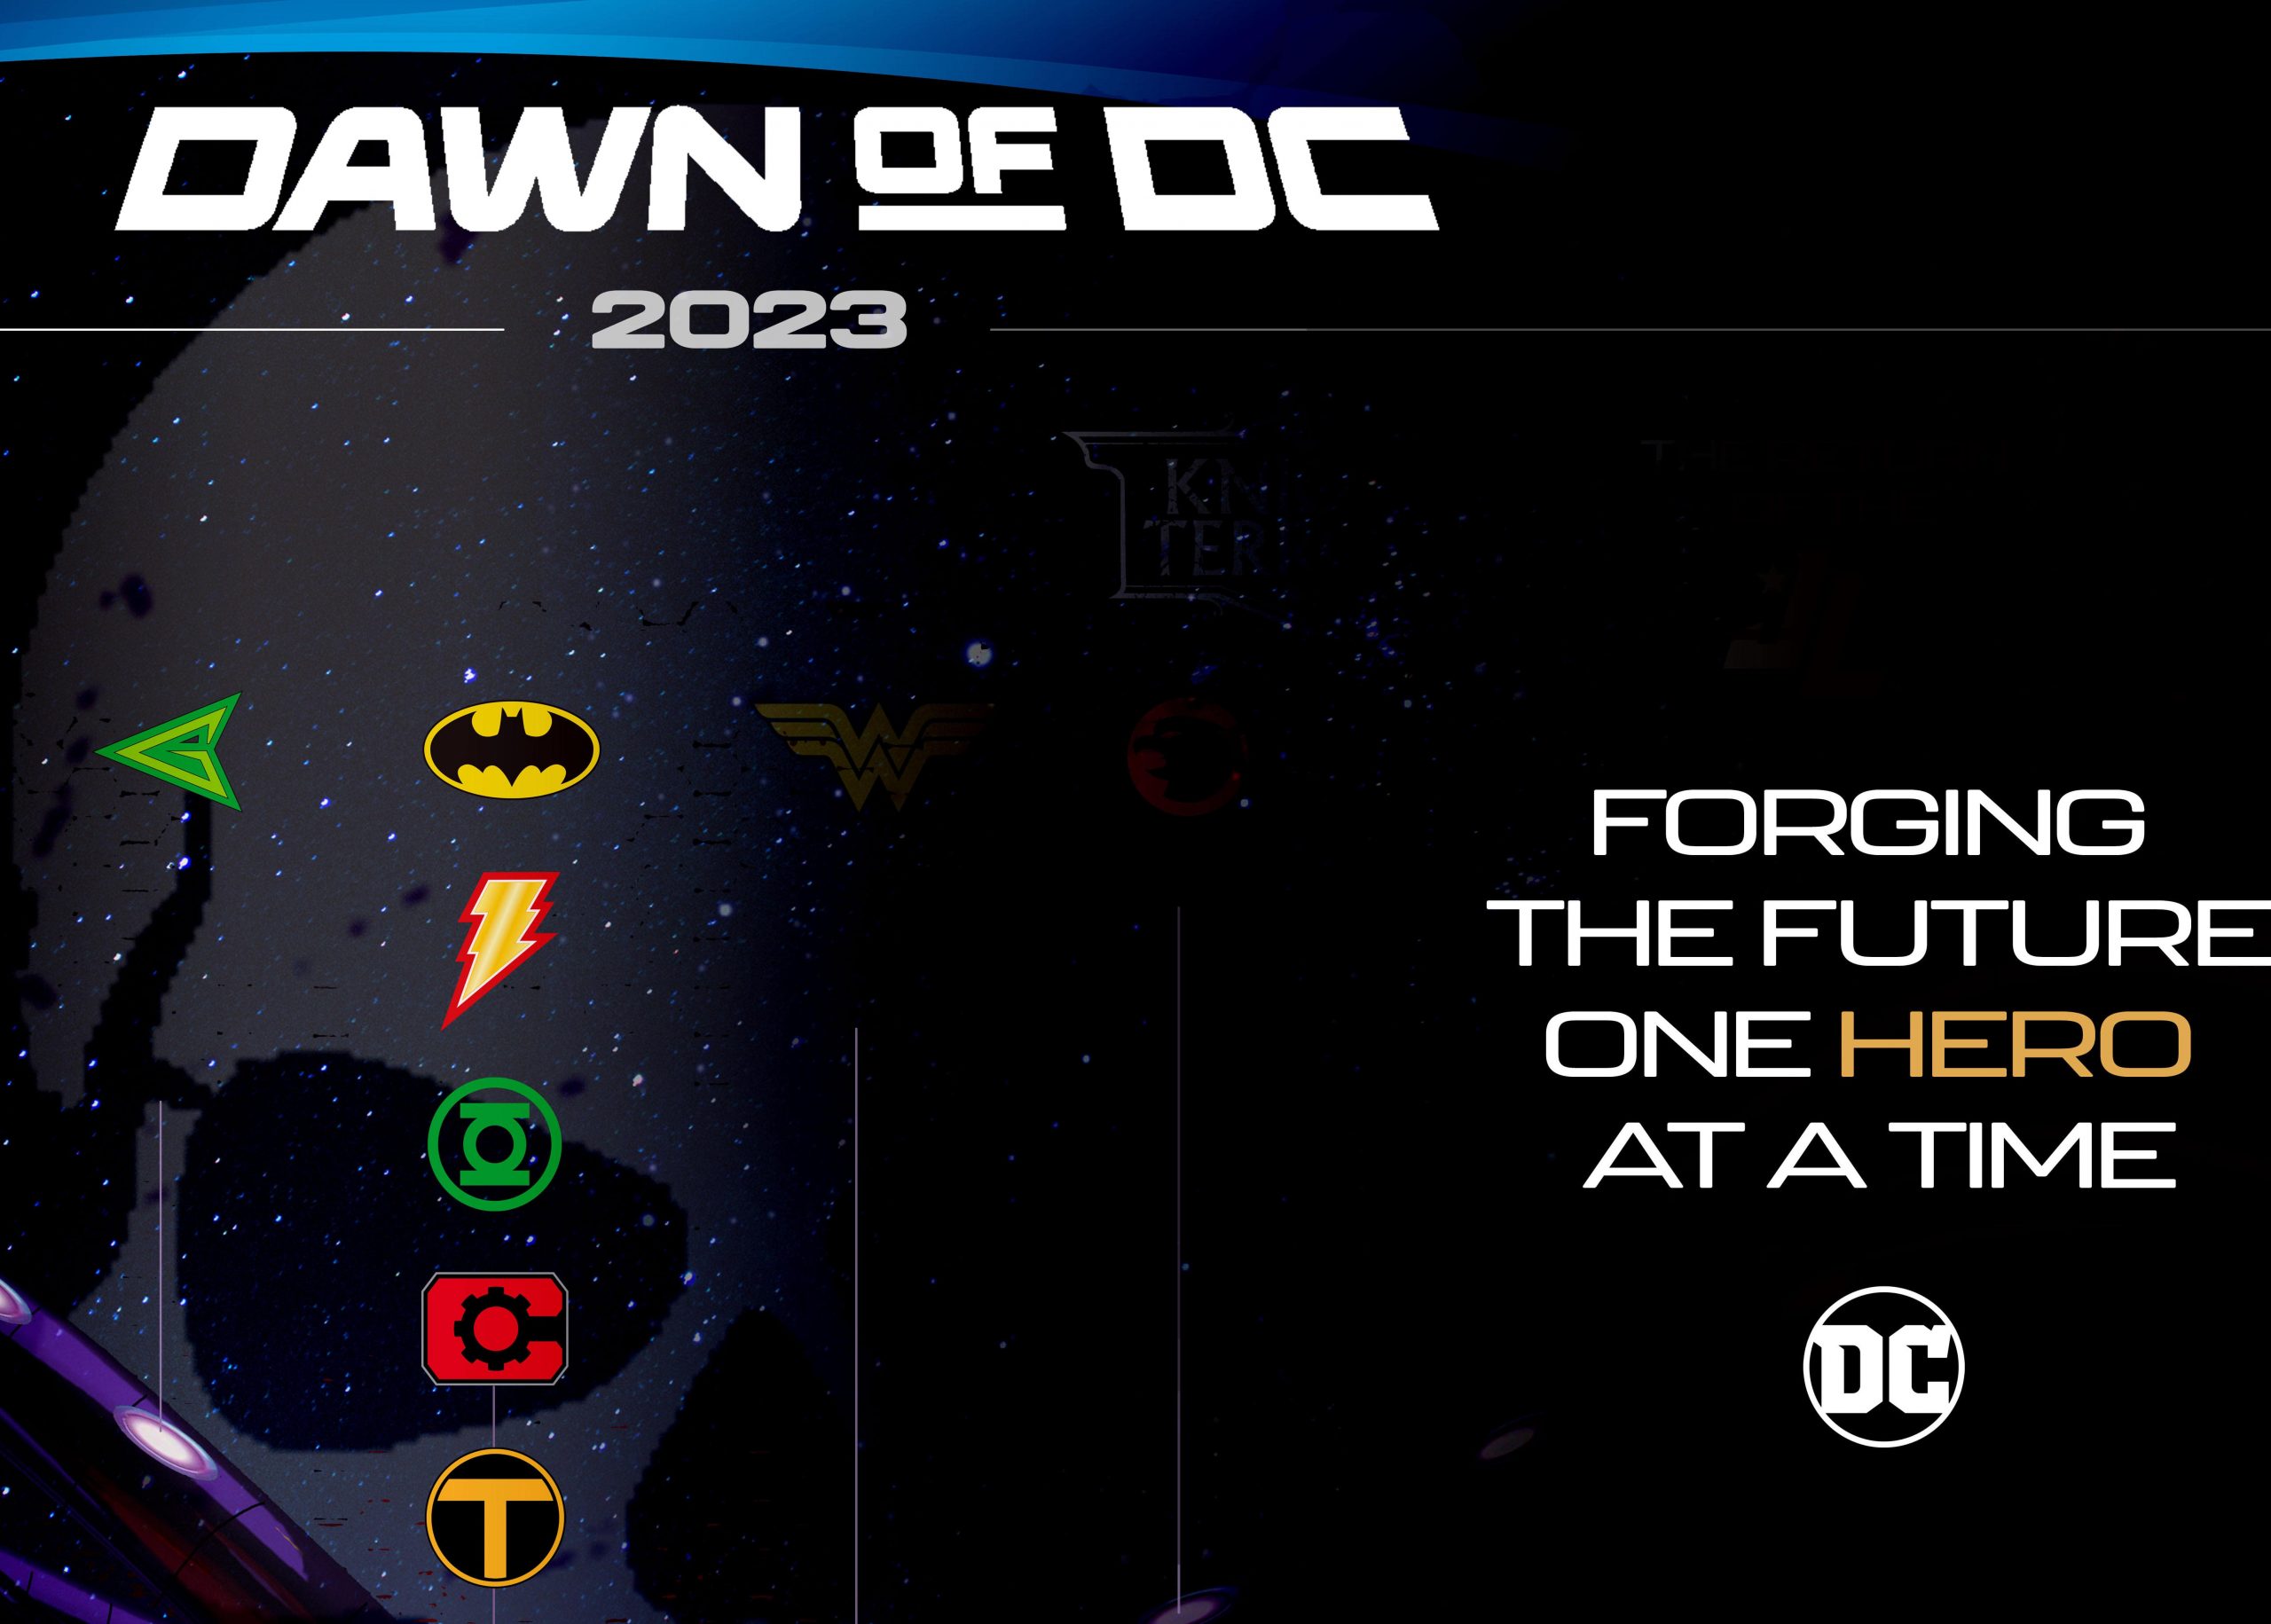 New Dawn of DC 2023 details reveal Cyborg, Titans, Green Lantern, and more